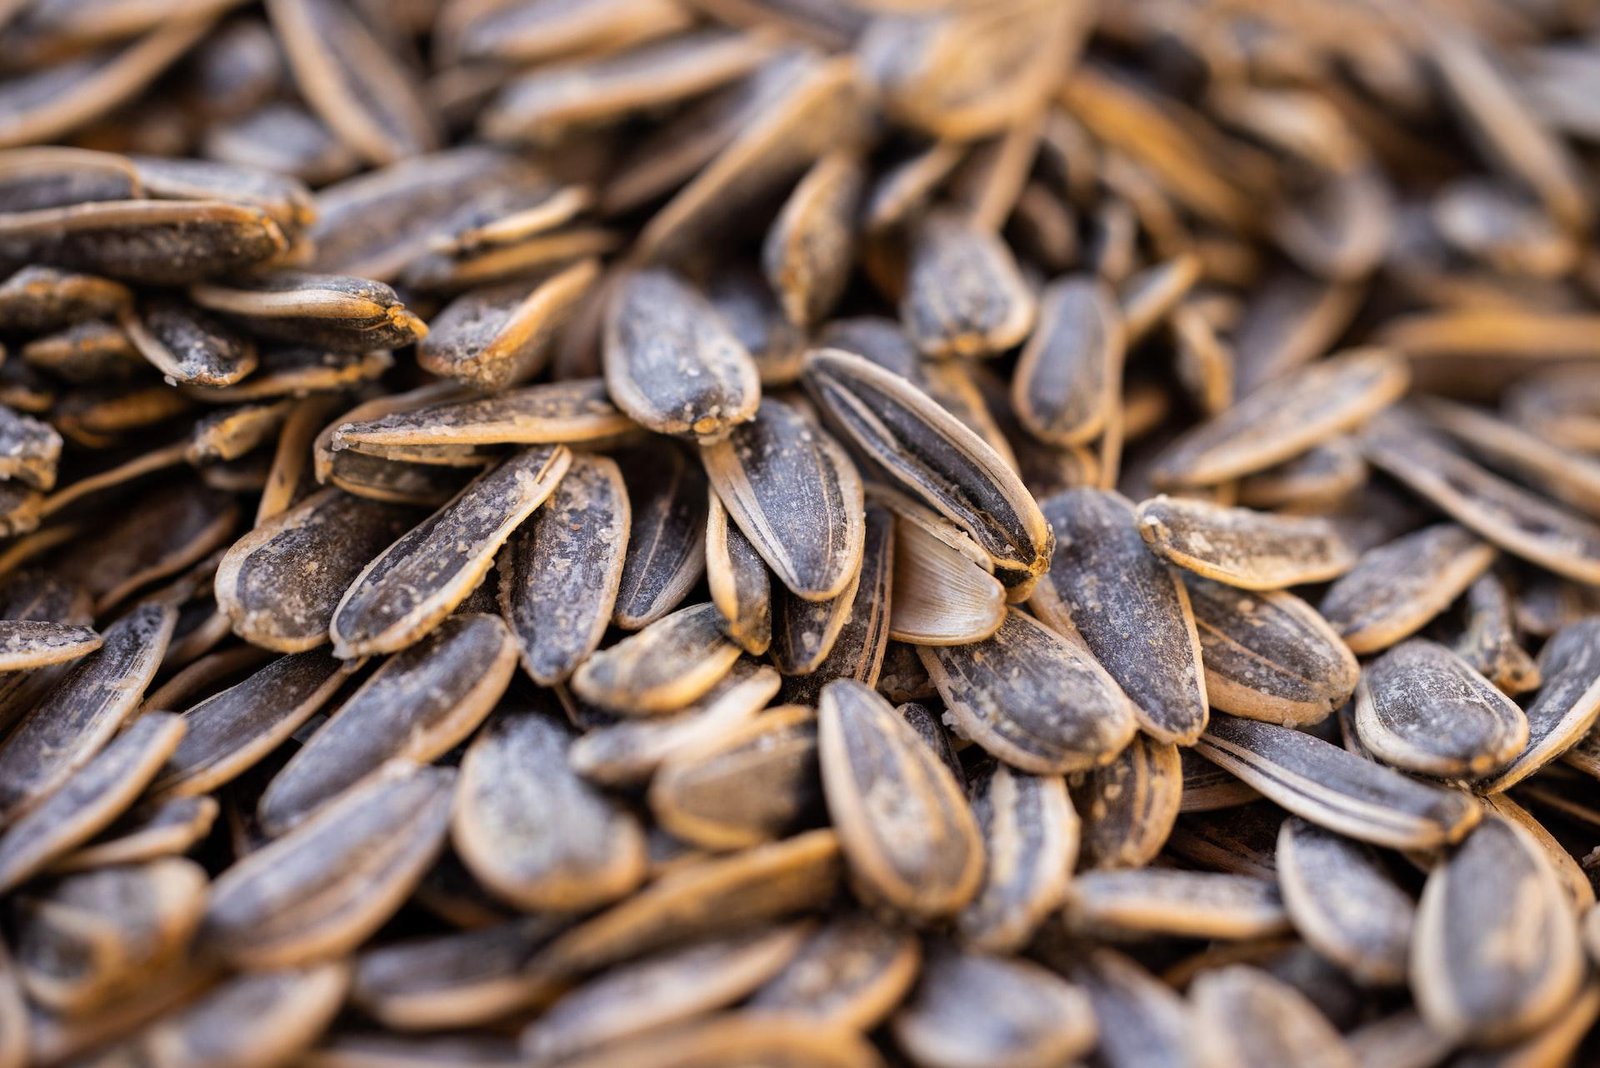 4 Reasons Why You Should Eat More Sunflower Seeds